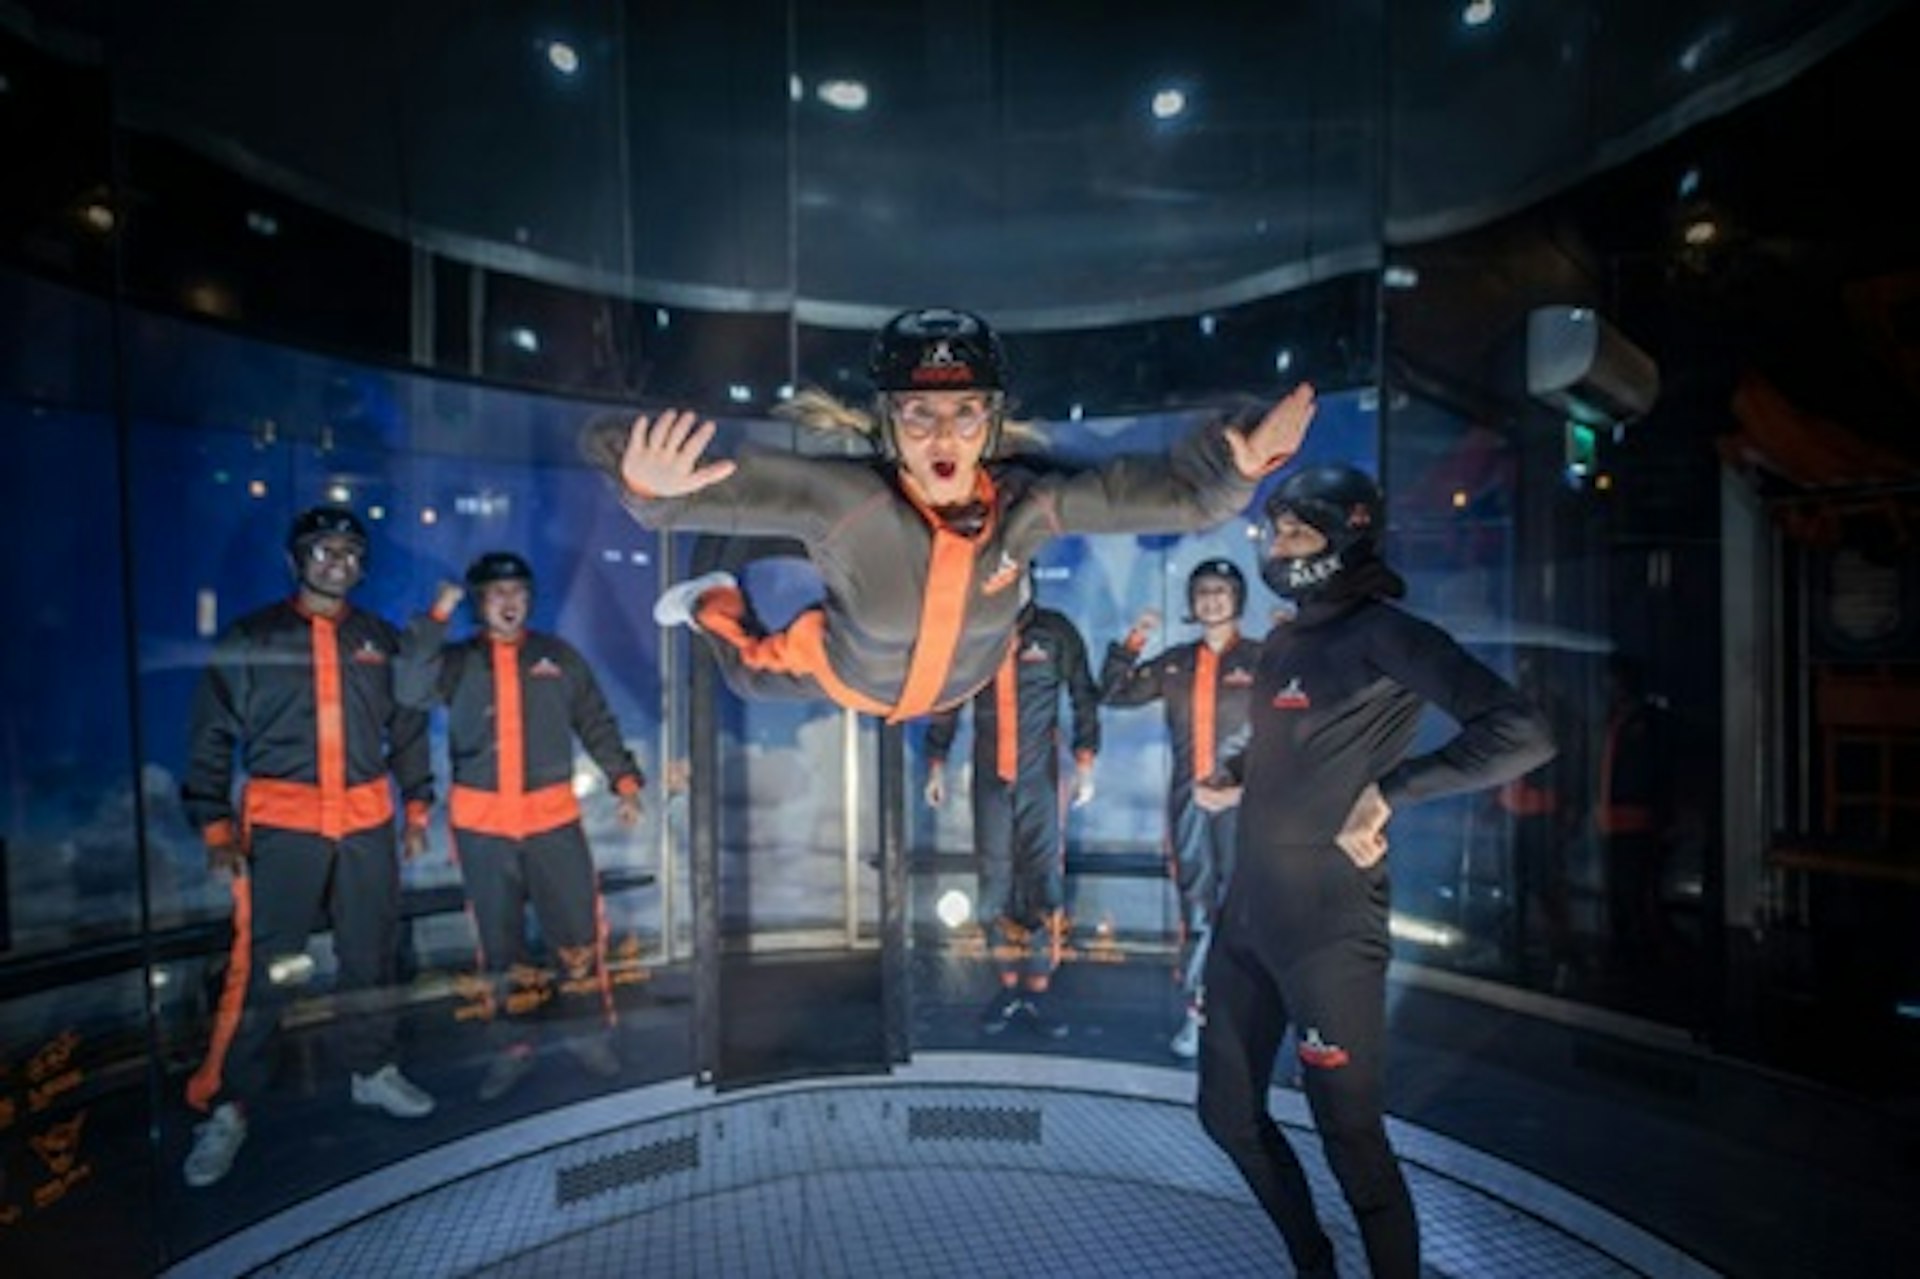 iFly Indoor Skydiving and Archery at The Bear Grylls Adventure 3